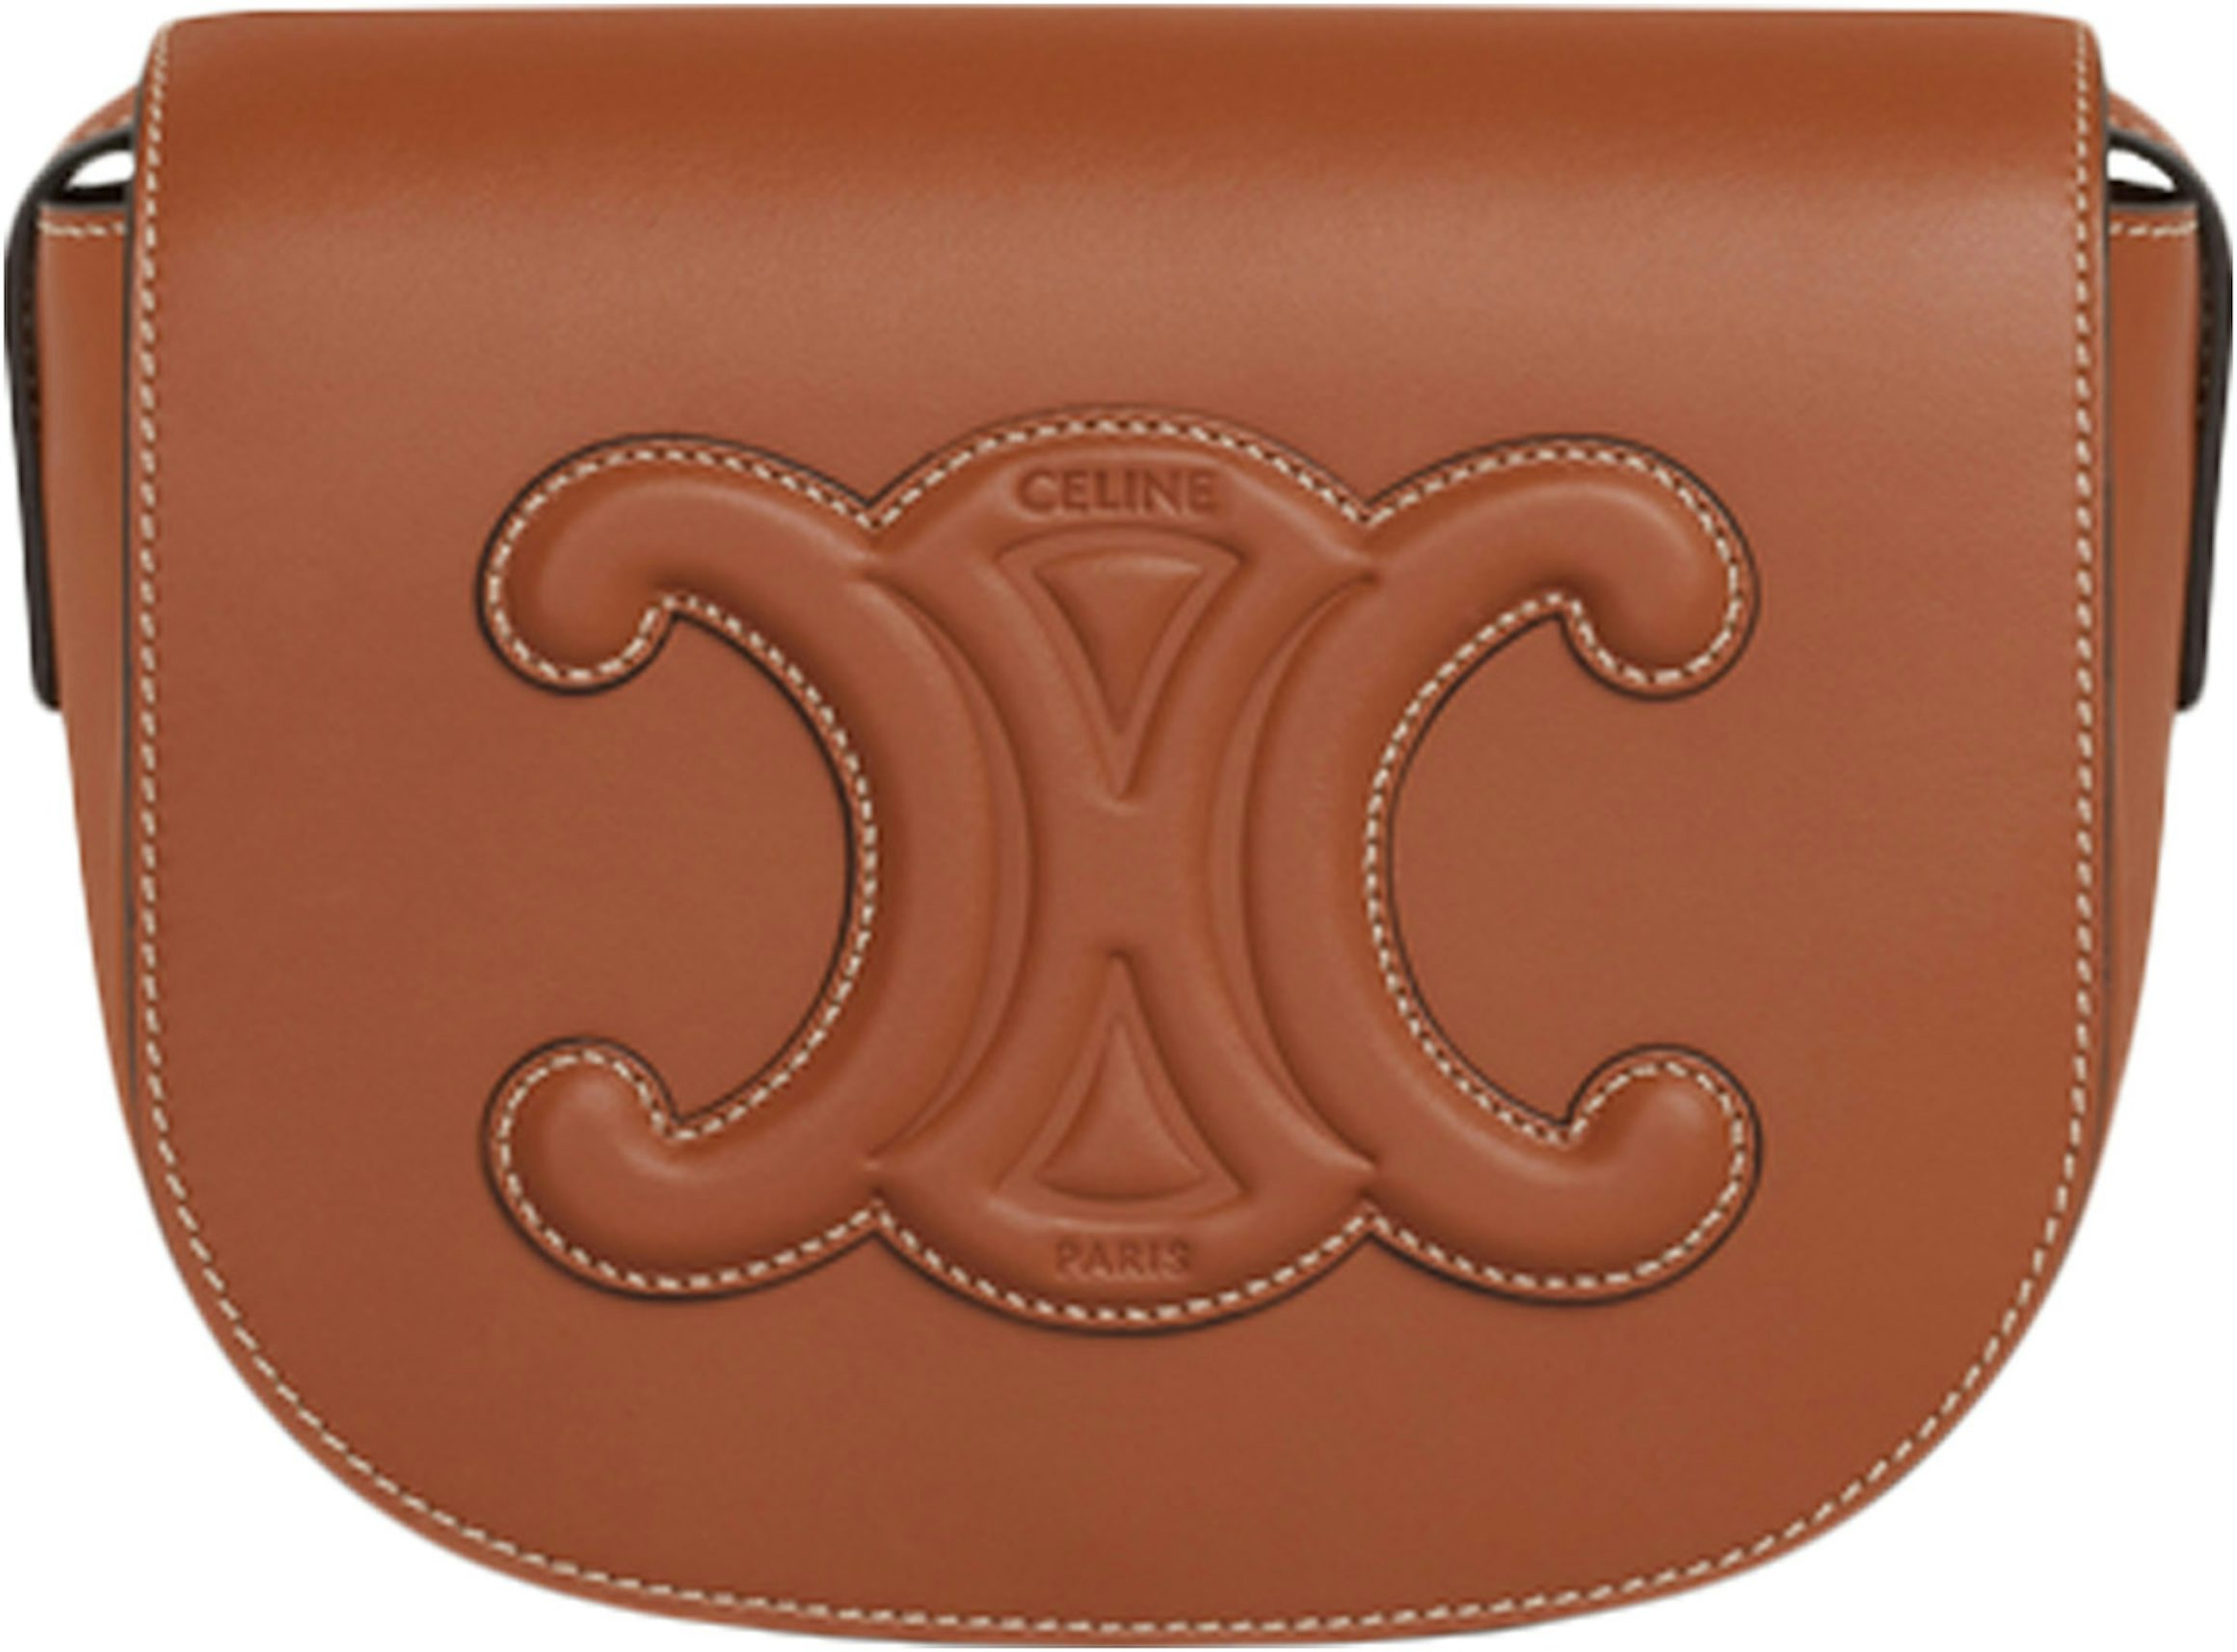 Women's Clutch on Chain Cuir Triomphe in SMOOTH CALFSKIN WITH Triomphe  EMBROIDERY, CELINE